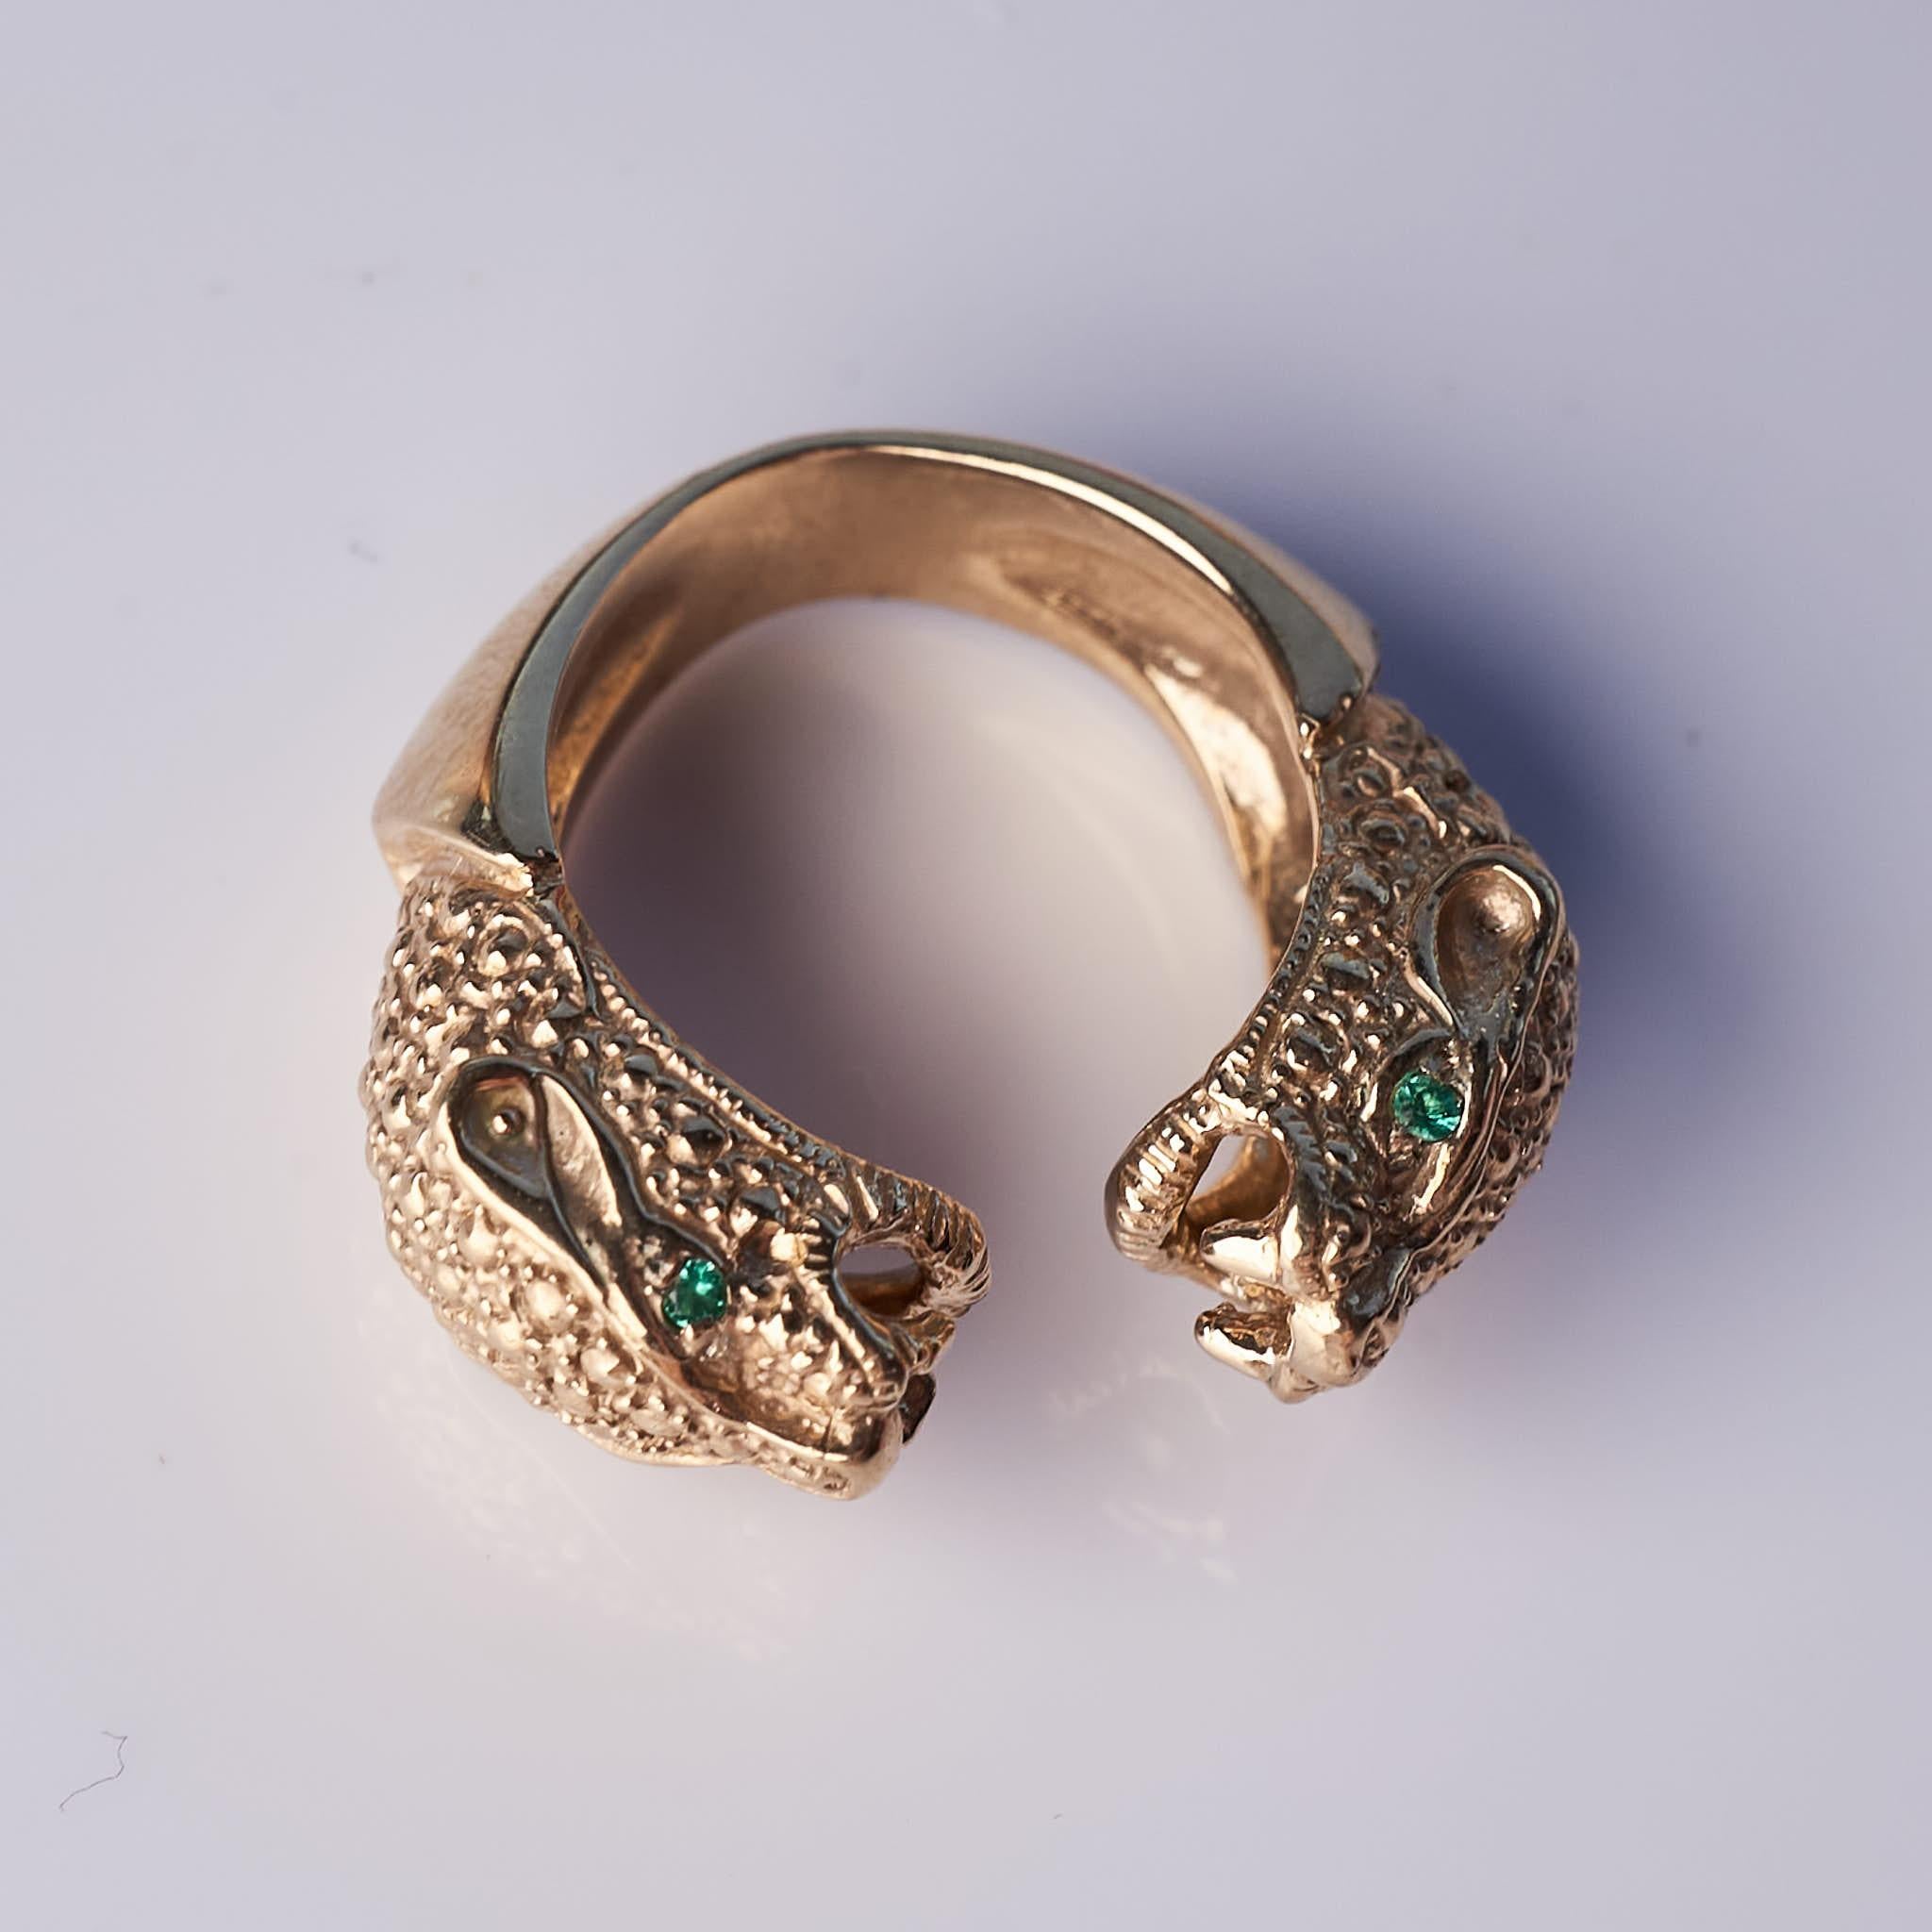 Brilliant Cut Emerald Jaguar Ring Gold Animal Cocktail Ring Animal Jewelry J Dauphin For Sale